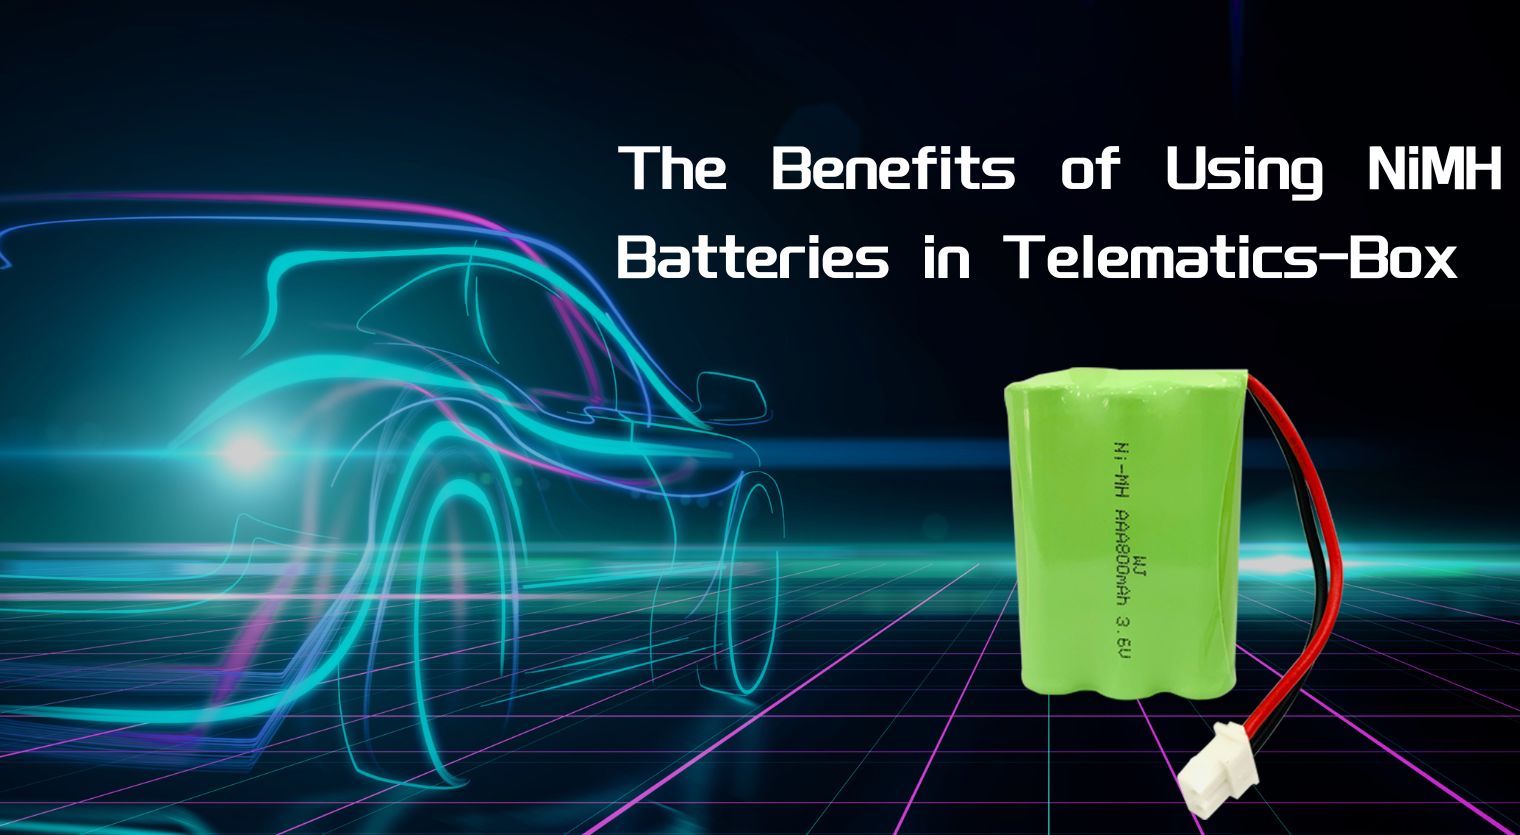 The Benefits of Using NiMH Batteries in Telematics-Box